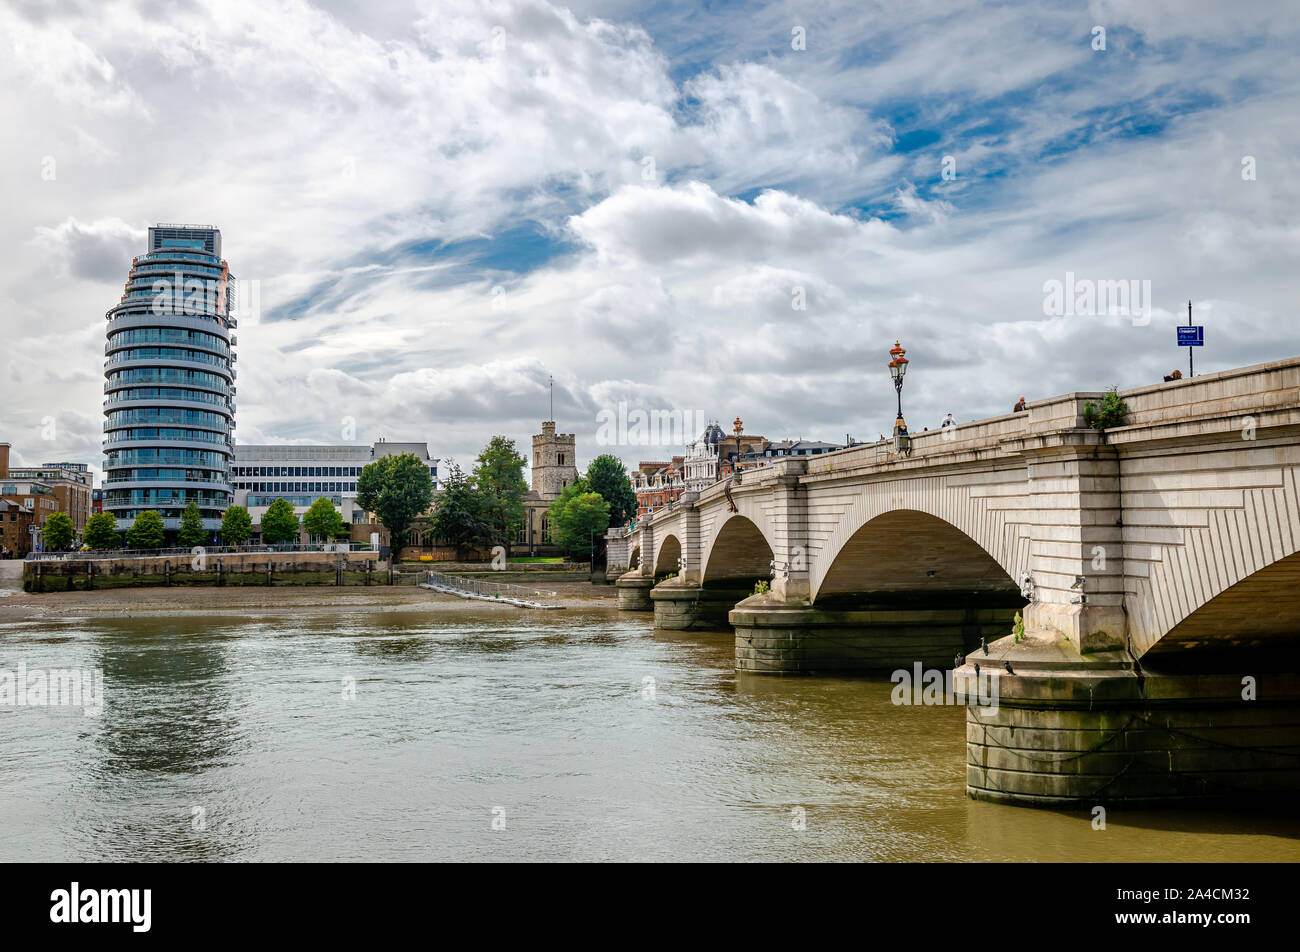 View of the Putney bridge with The St Mary's Church and the Putney Wharf Tower in the background. London, UK. Stock Photo